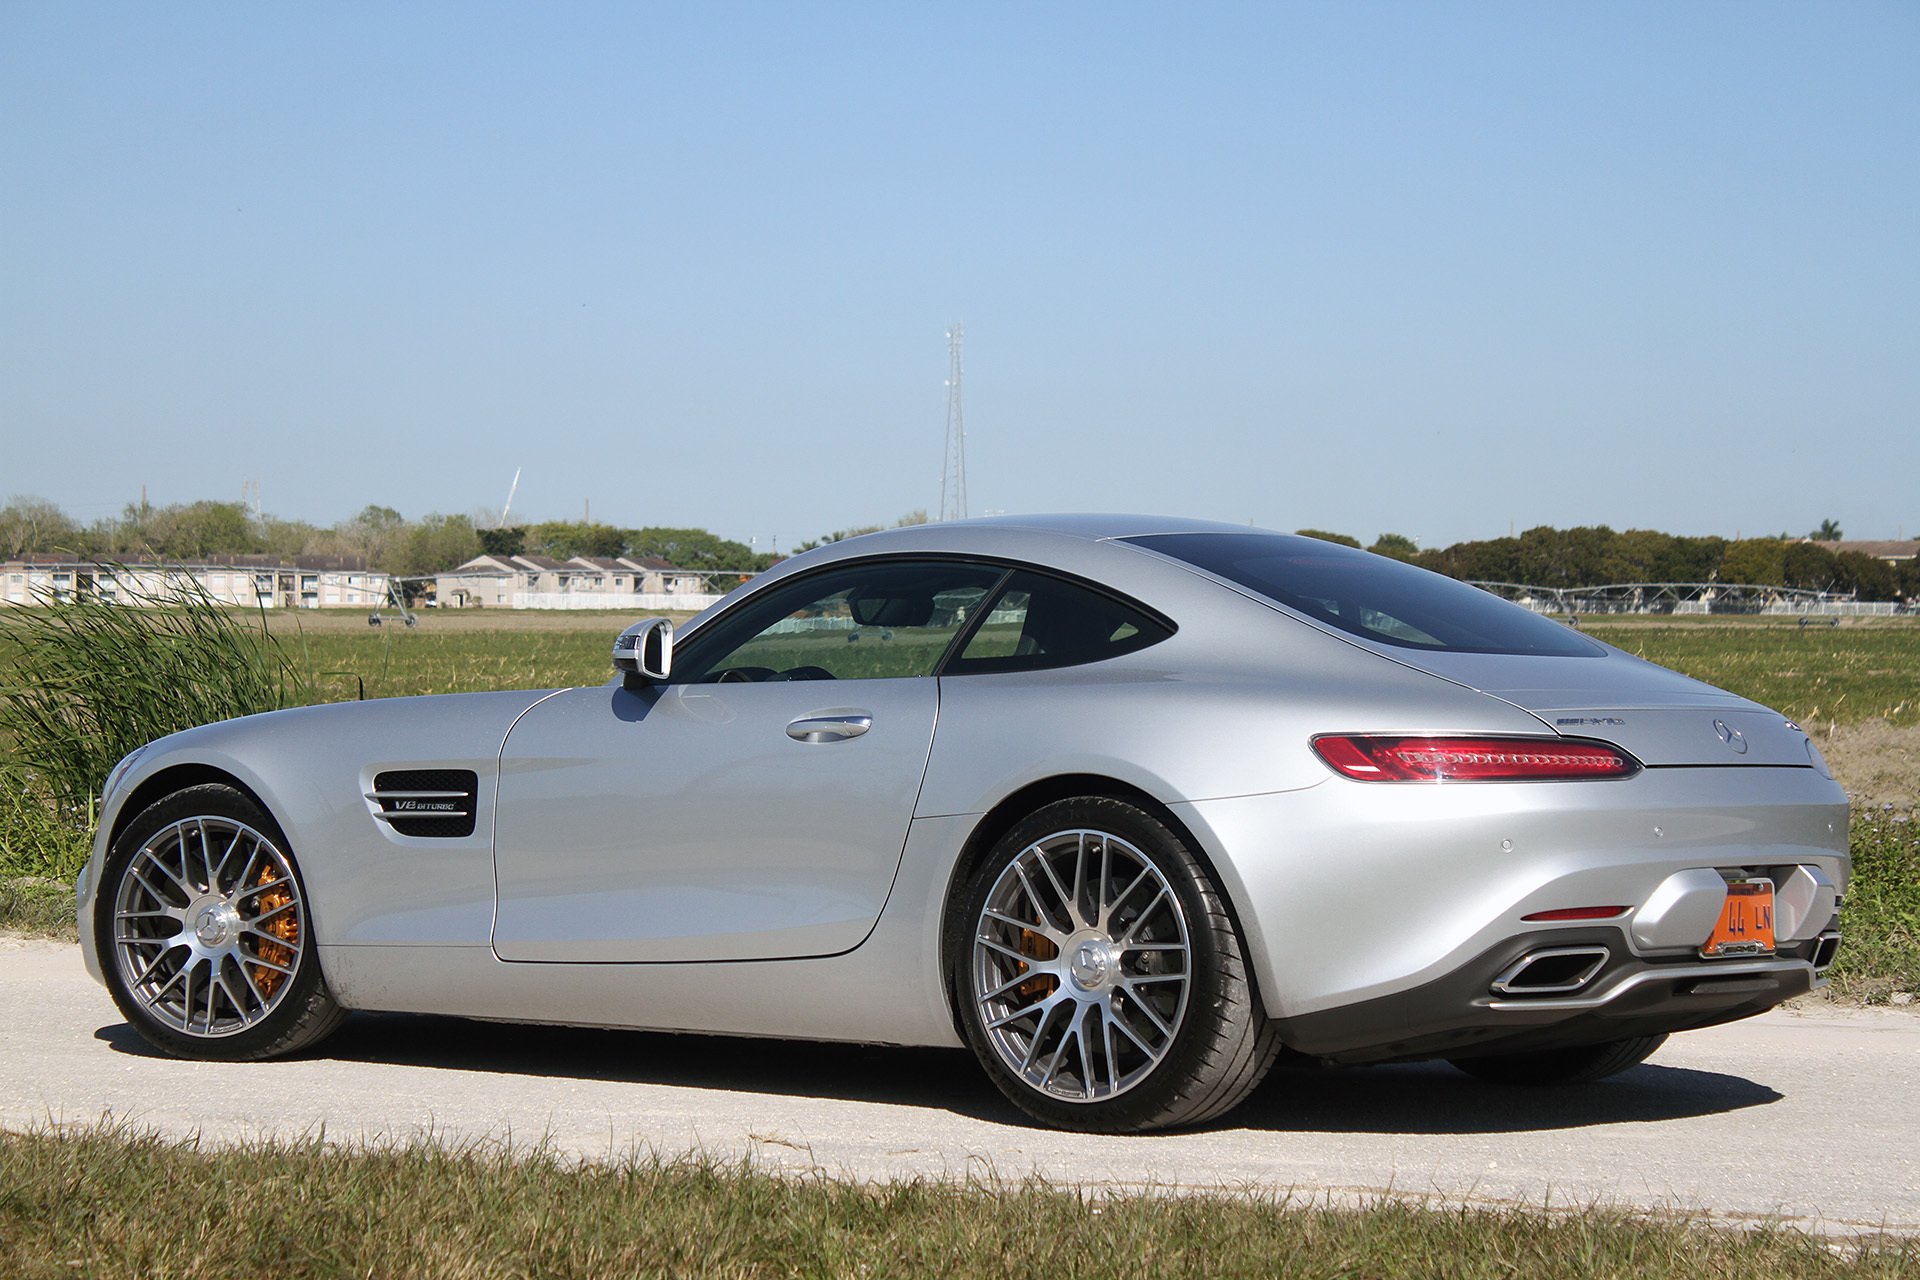 2016, Mercedes, Amg, Gts, Cars, Coupe Wallpaper